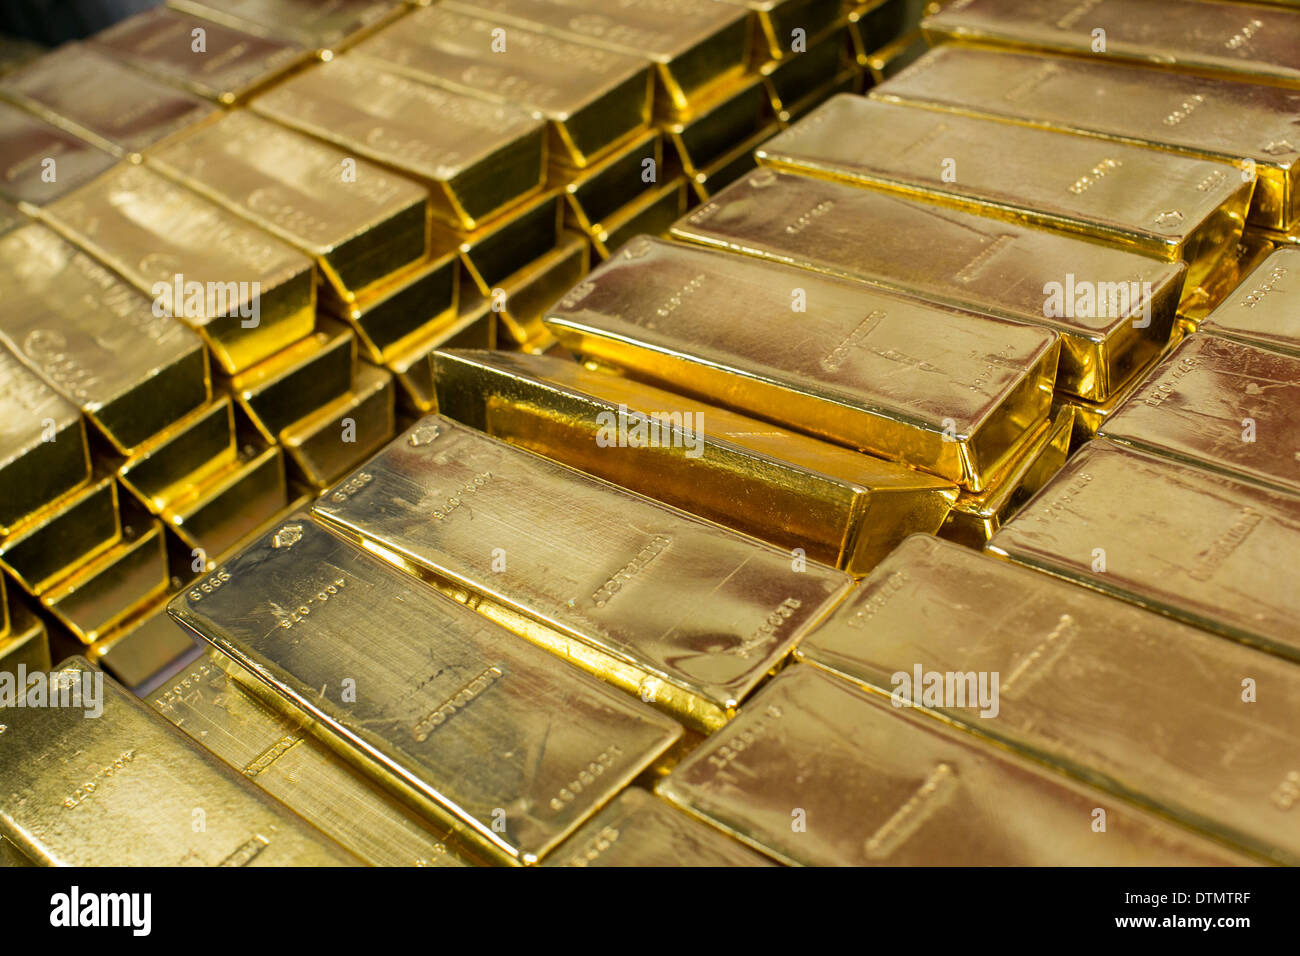 Bars of gold bullion owned by the U.S. Government at the West Point Mint. Stock Photo